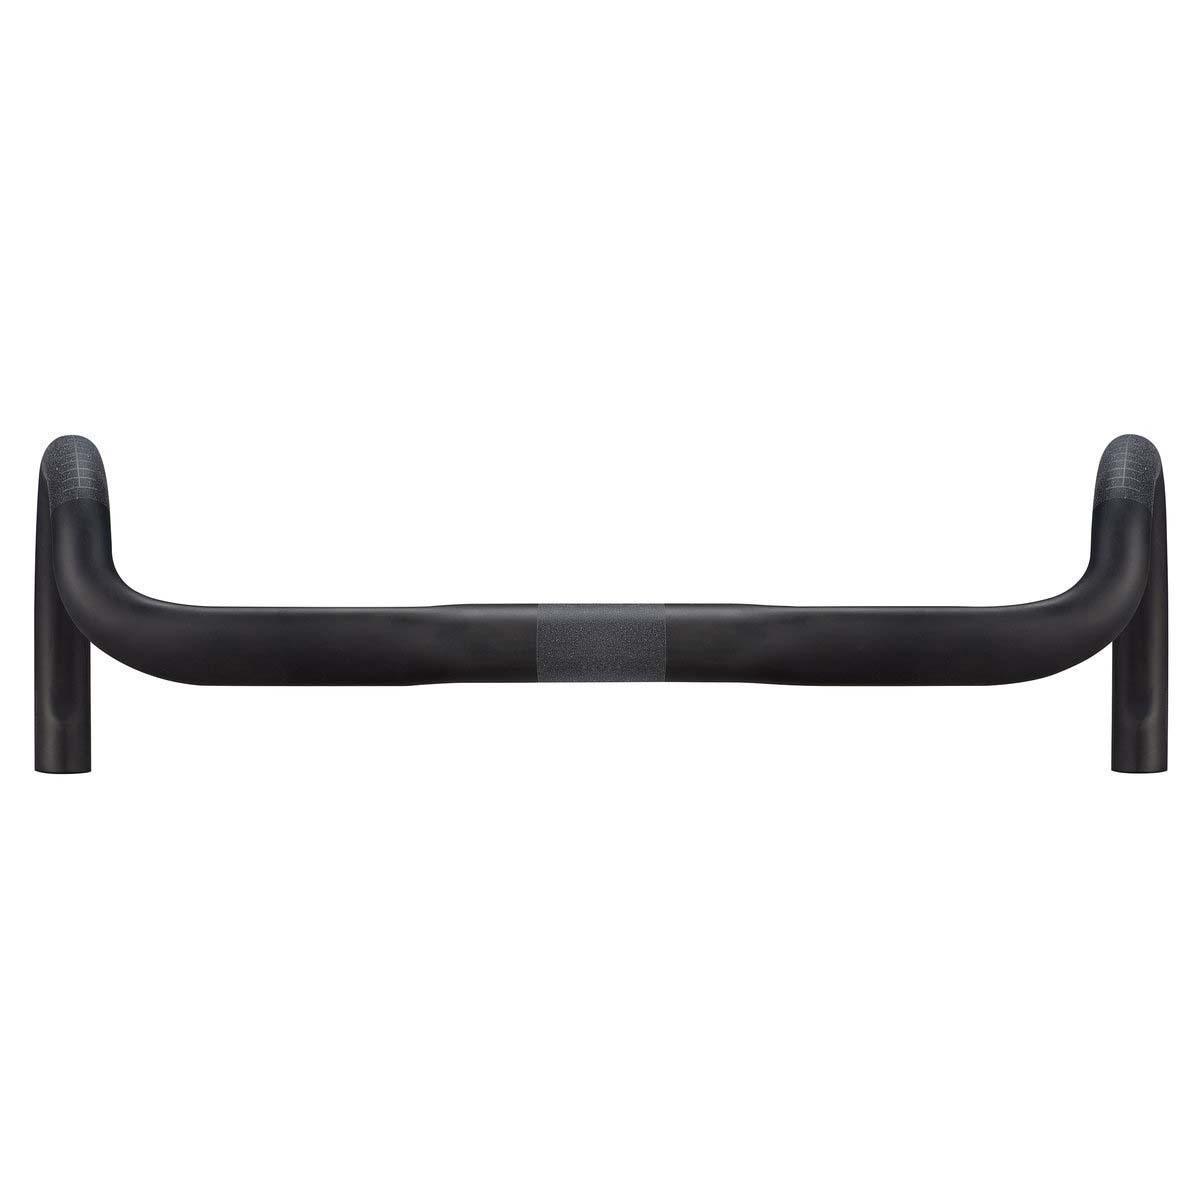 Roval Terra Handlebars | Strictly Bicycles 